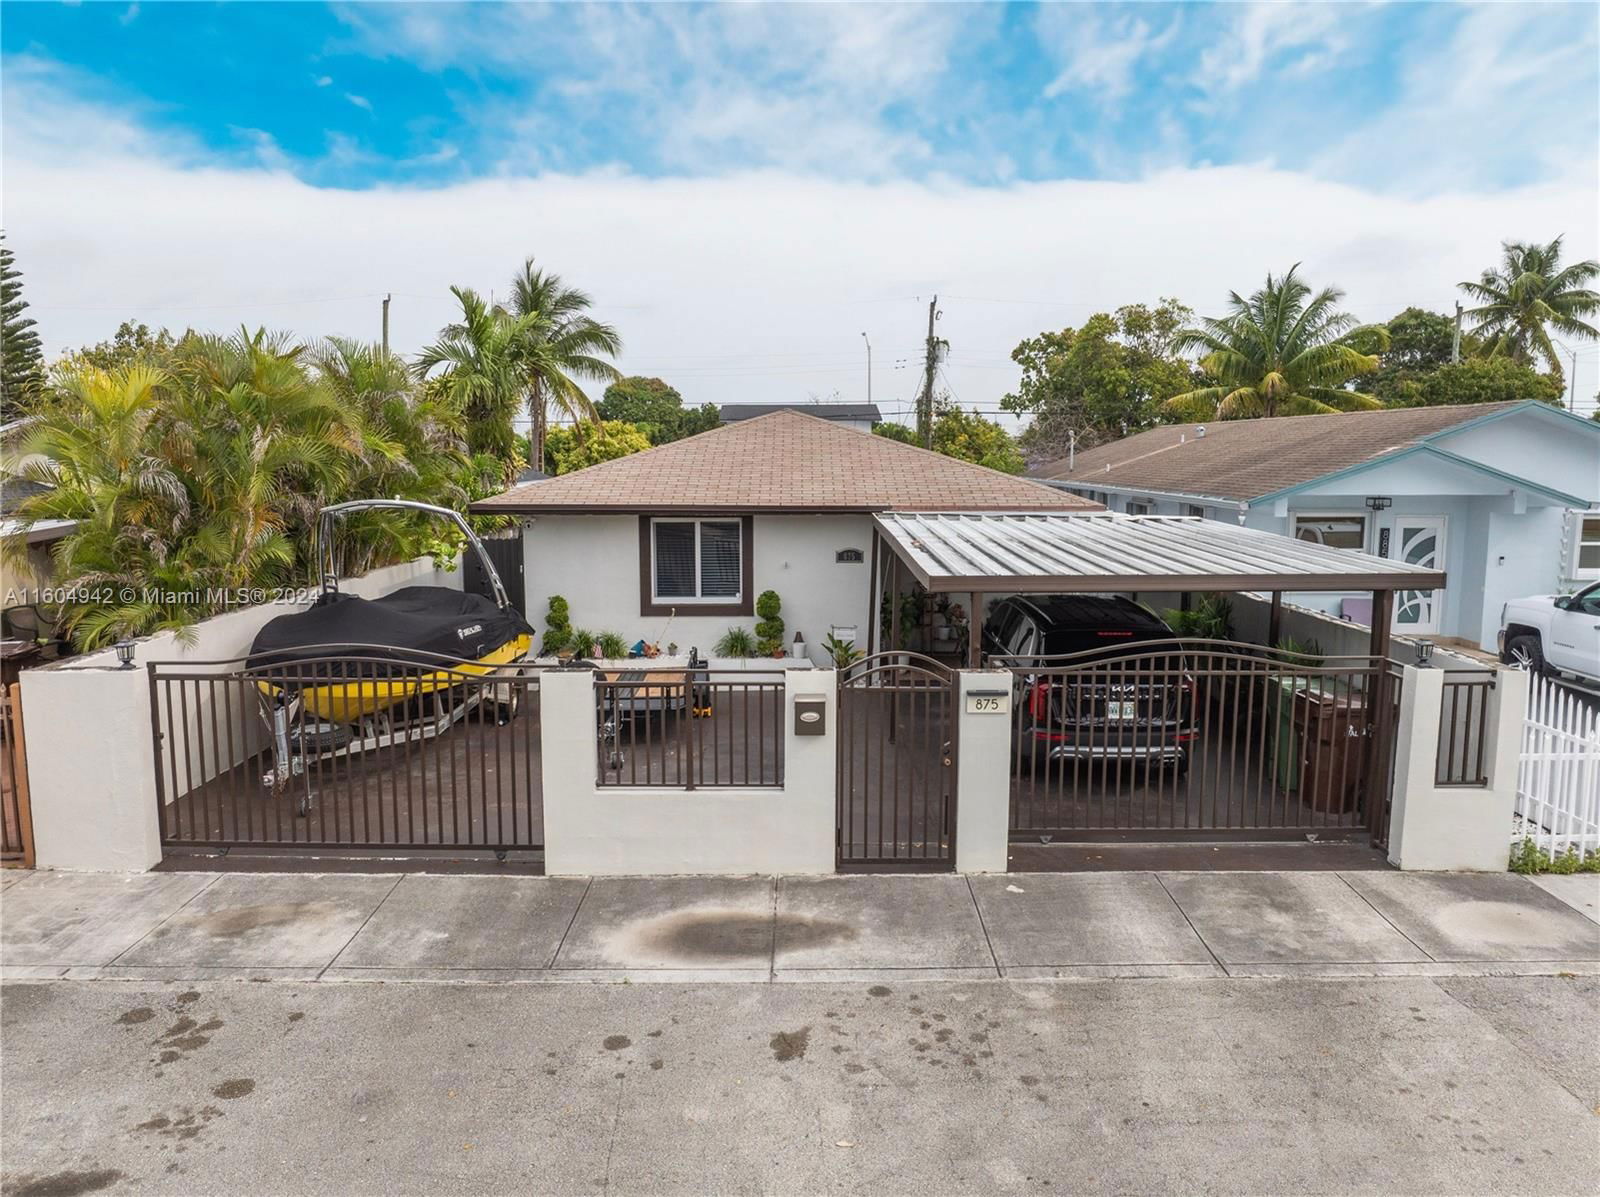 Real estate property located at 875 29th St, Miami-Dade County, HIALEAH 13TH ADDN AMD PL, Hialeah, FL